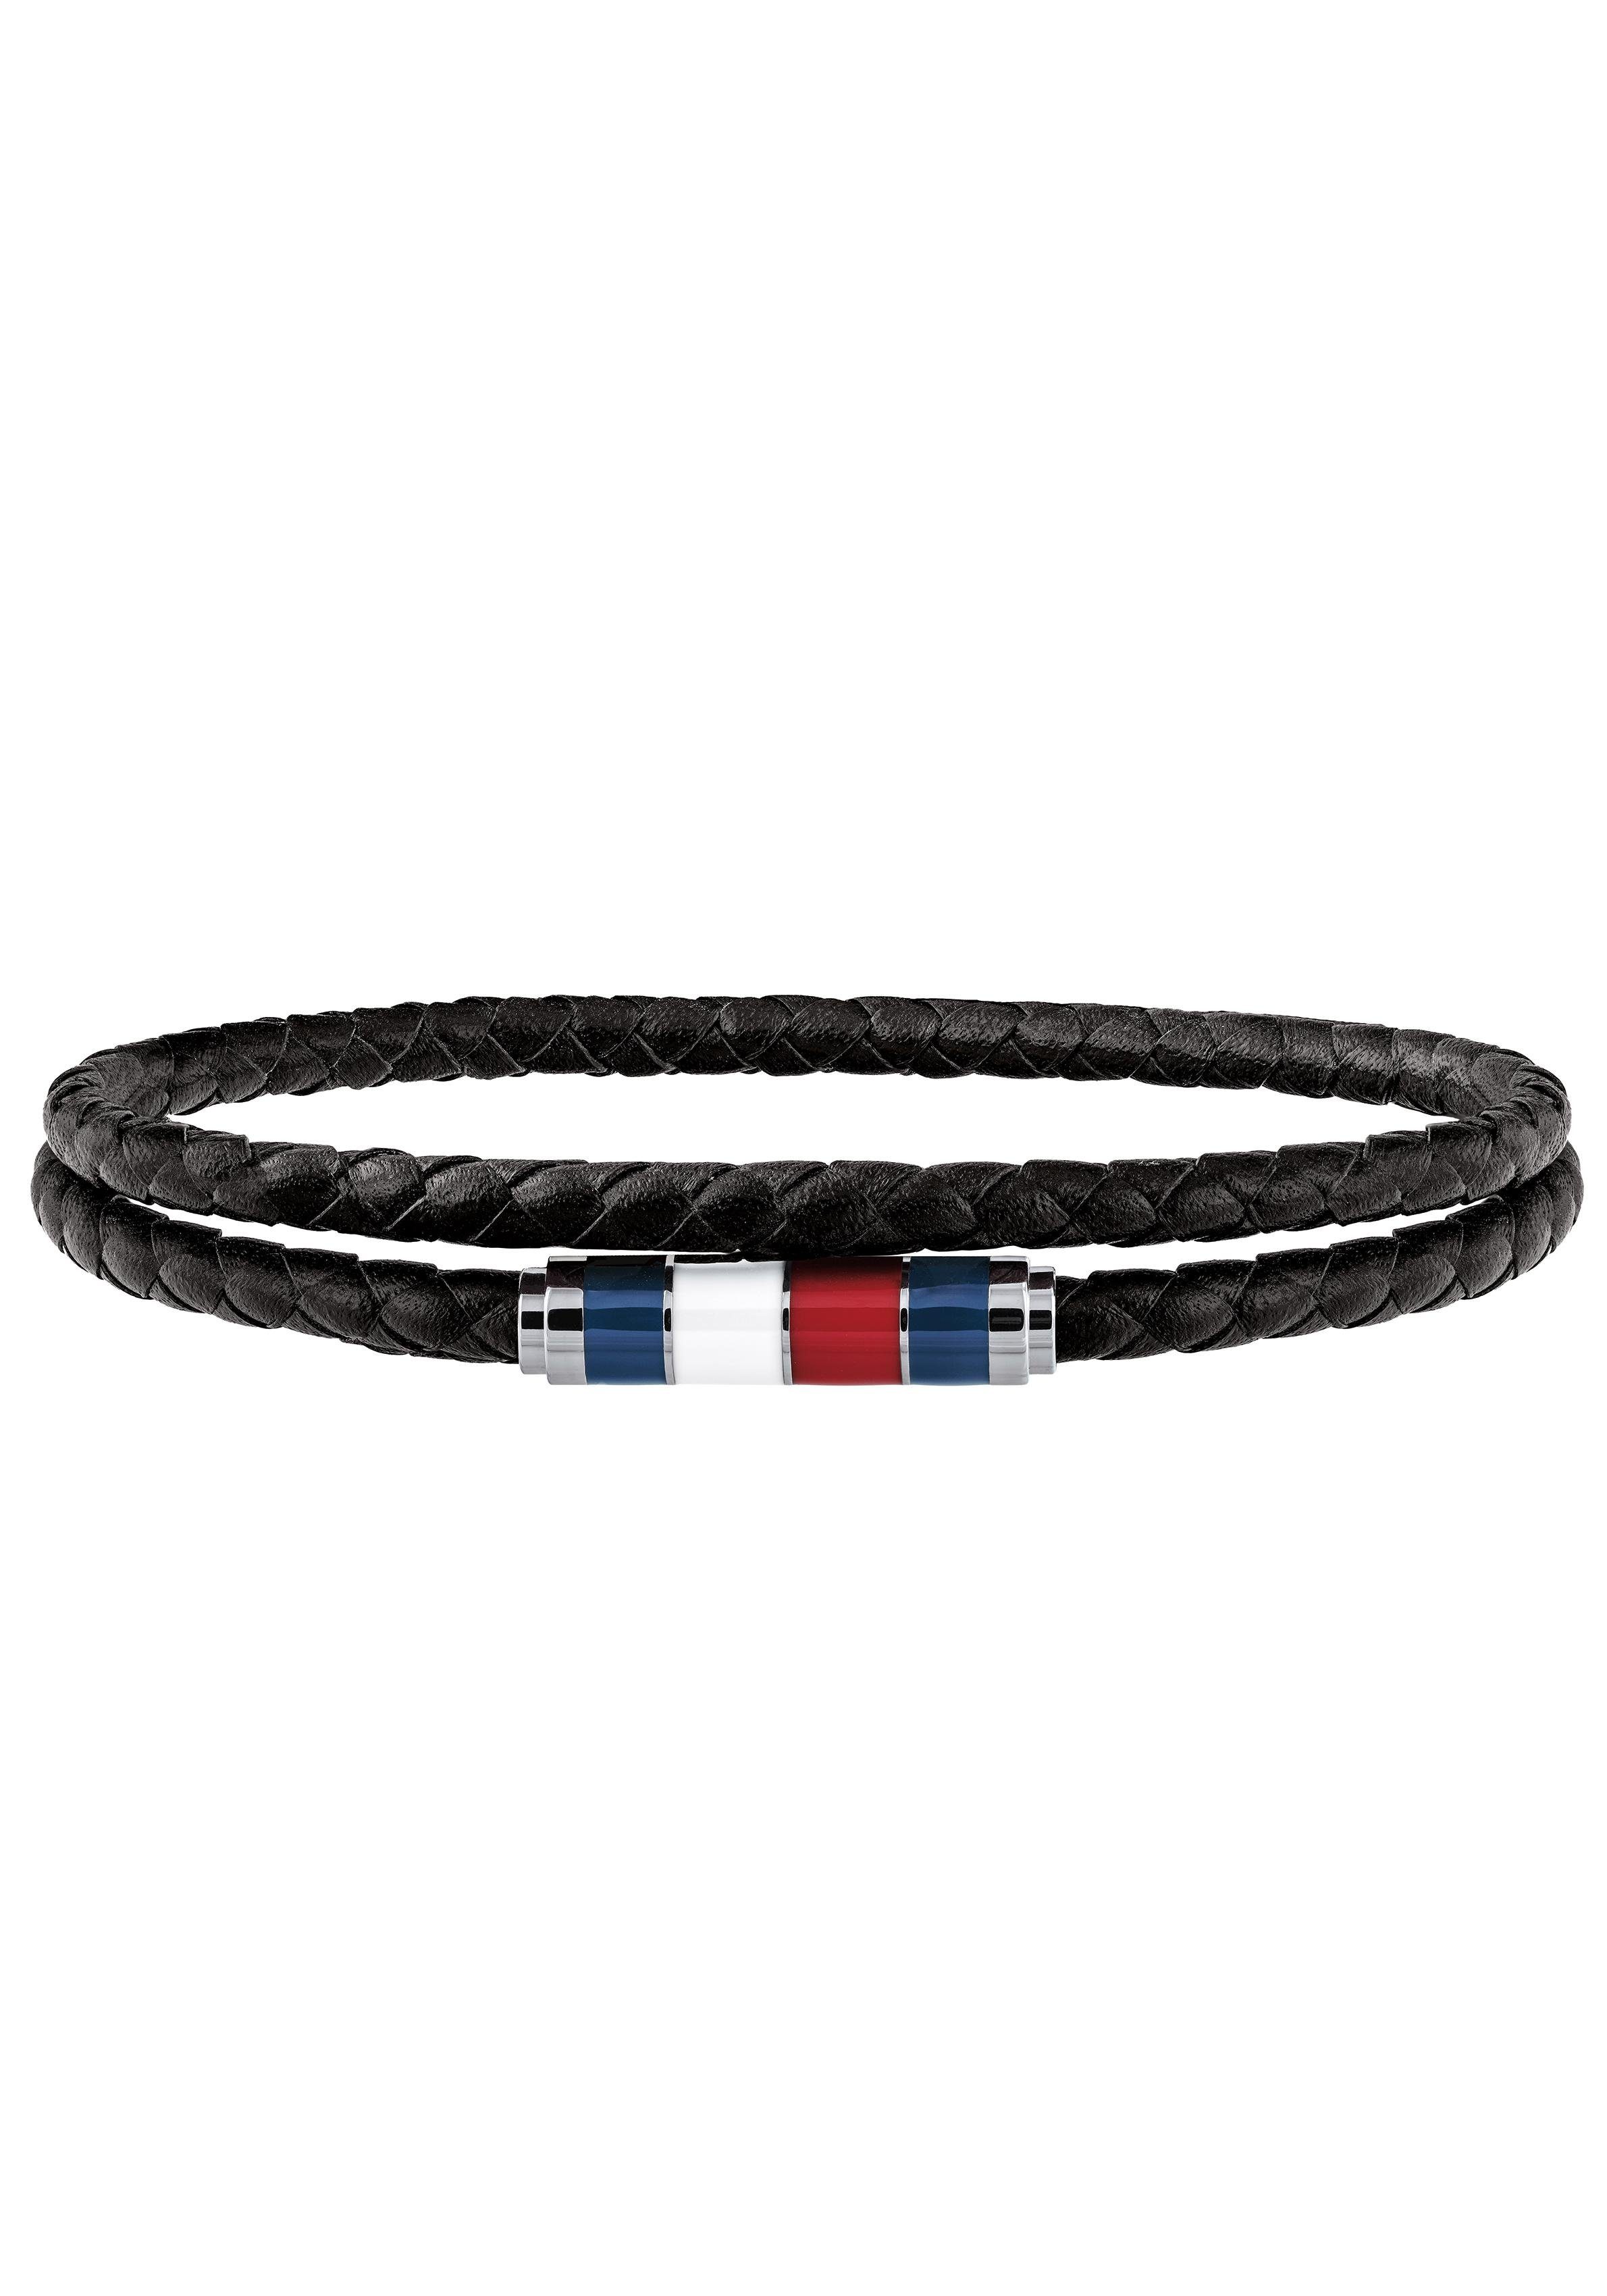 Tommy Hilfiger Armband »CASUAL CORE, 2790056«, mit Emaille online kaufen |  OTTO